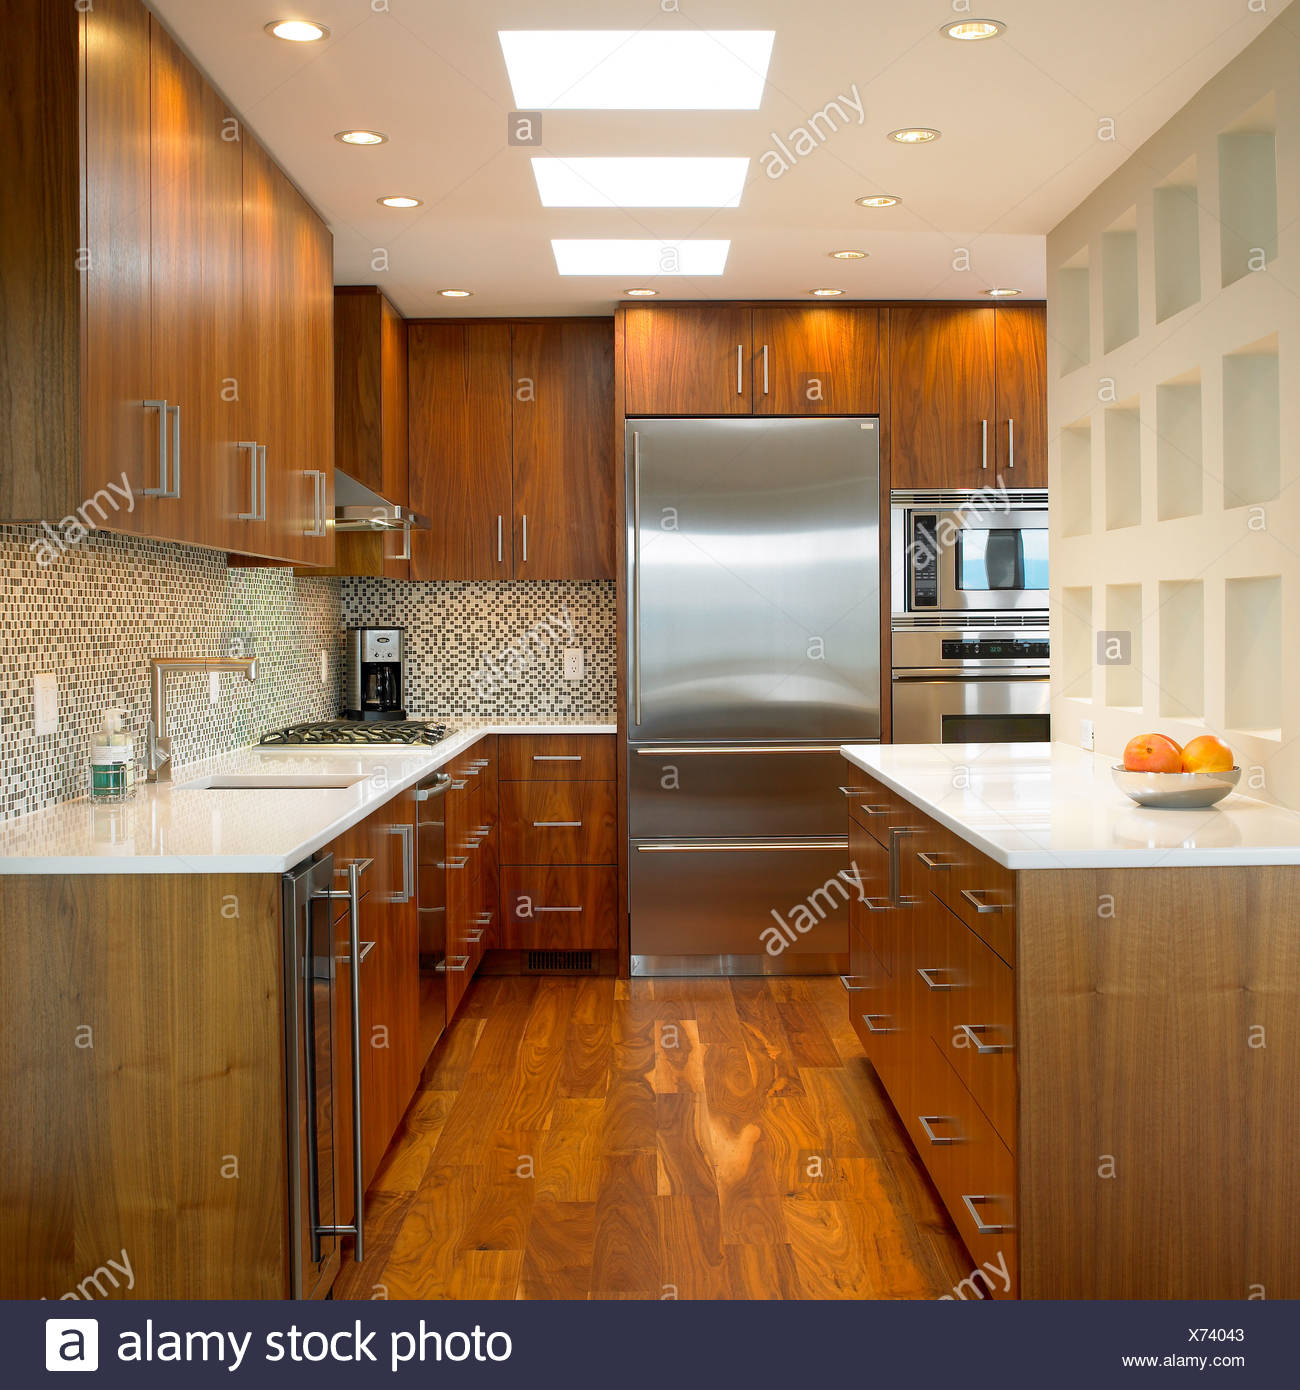 Kitchen With Walnut Cabinets And Corian Countertops Stock Photo